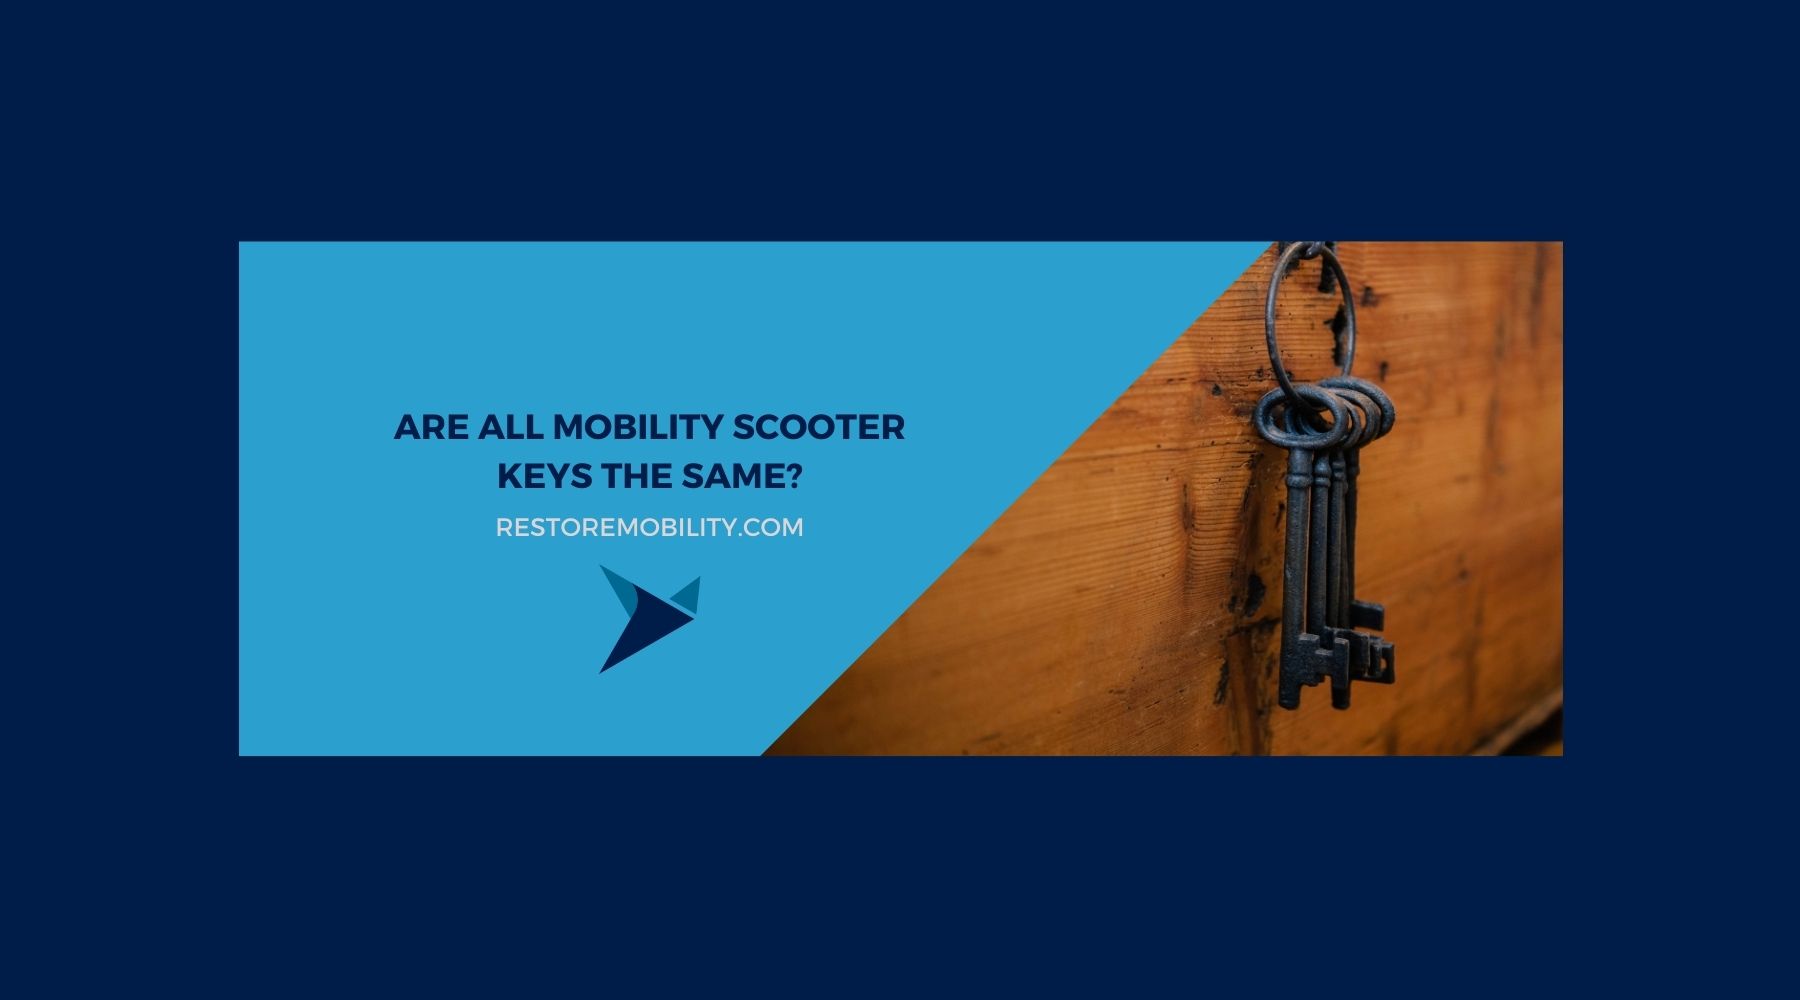 Are All Mobility Scooter Keys the Same?